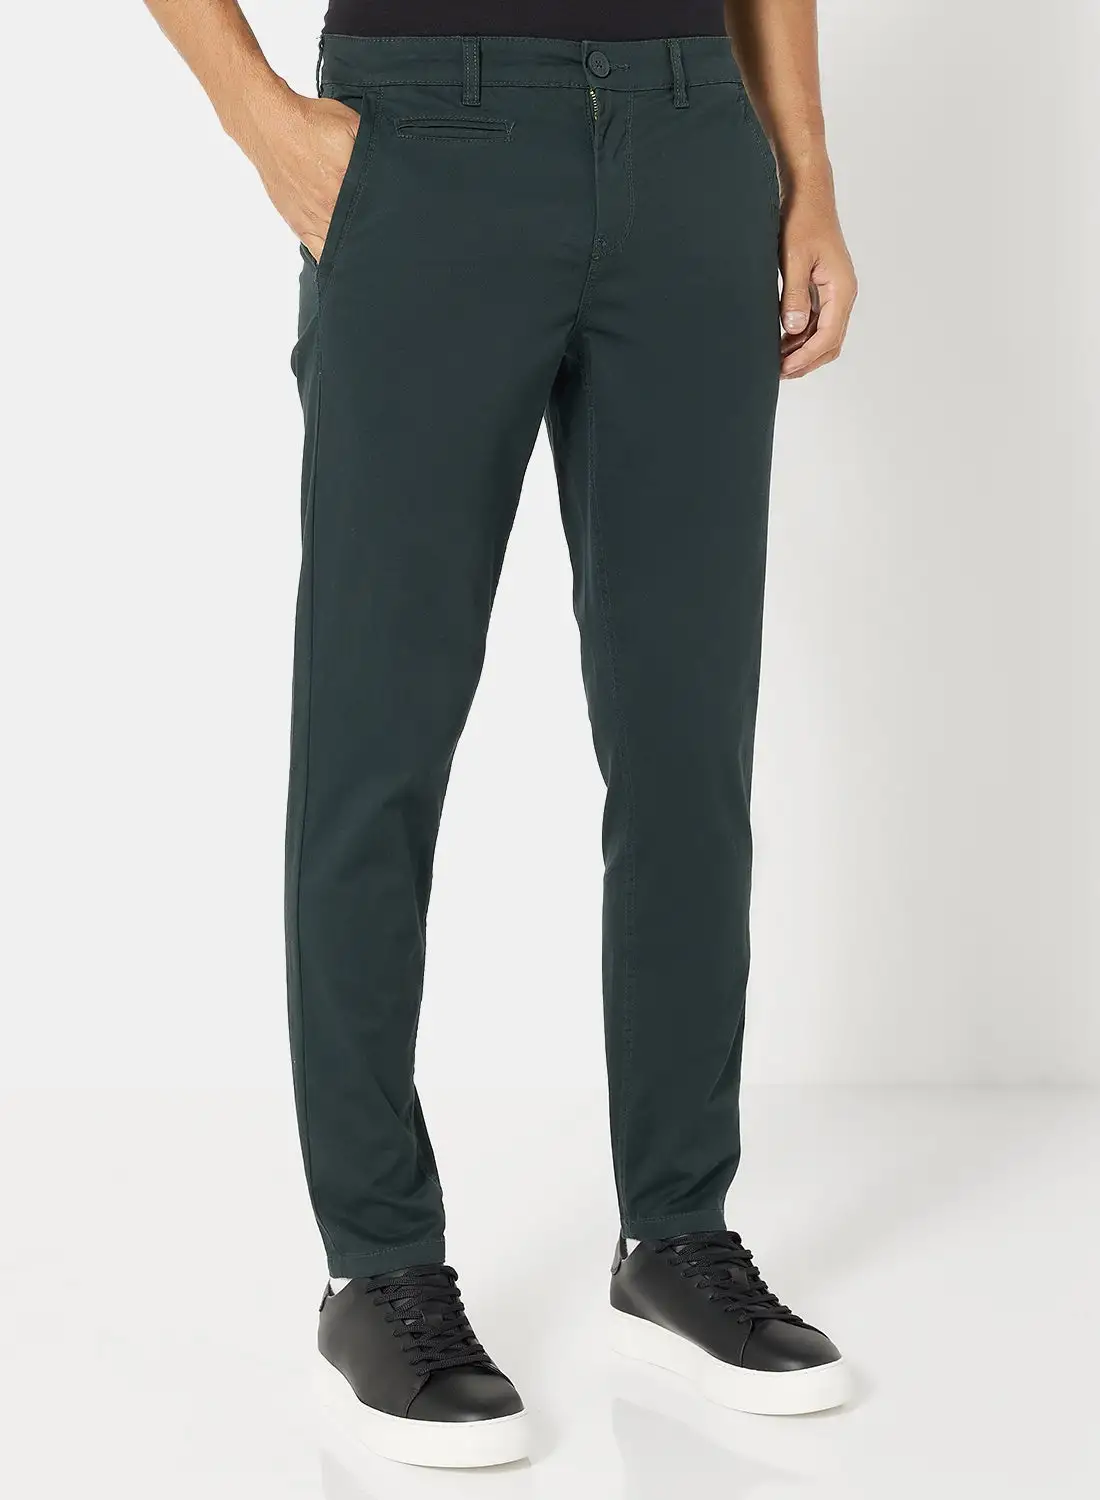 Noon East Solid Pattern Stretch Slim Fit Pants Olive